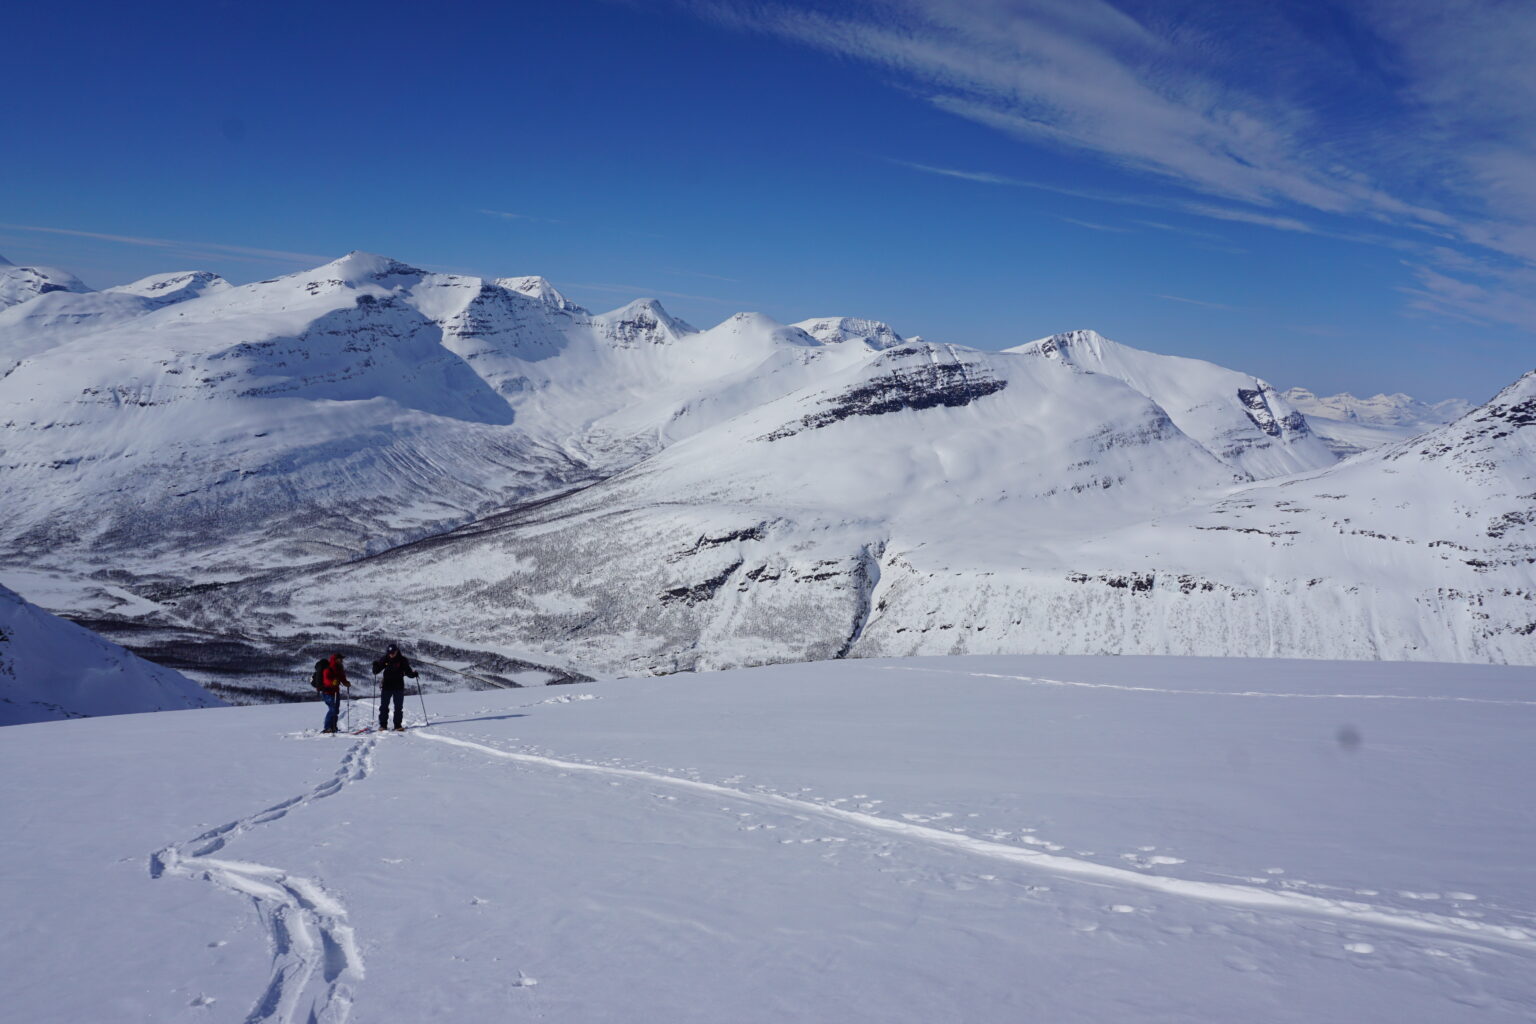 Ski touring up with the Tamokdalen Backcountry in the distance